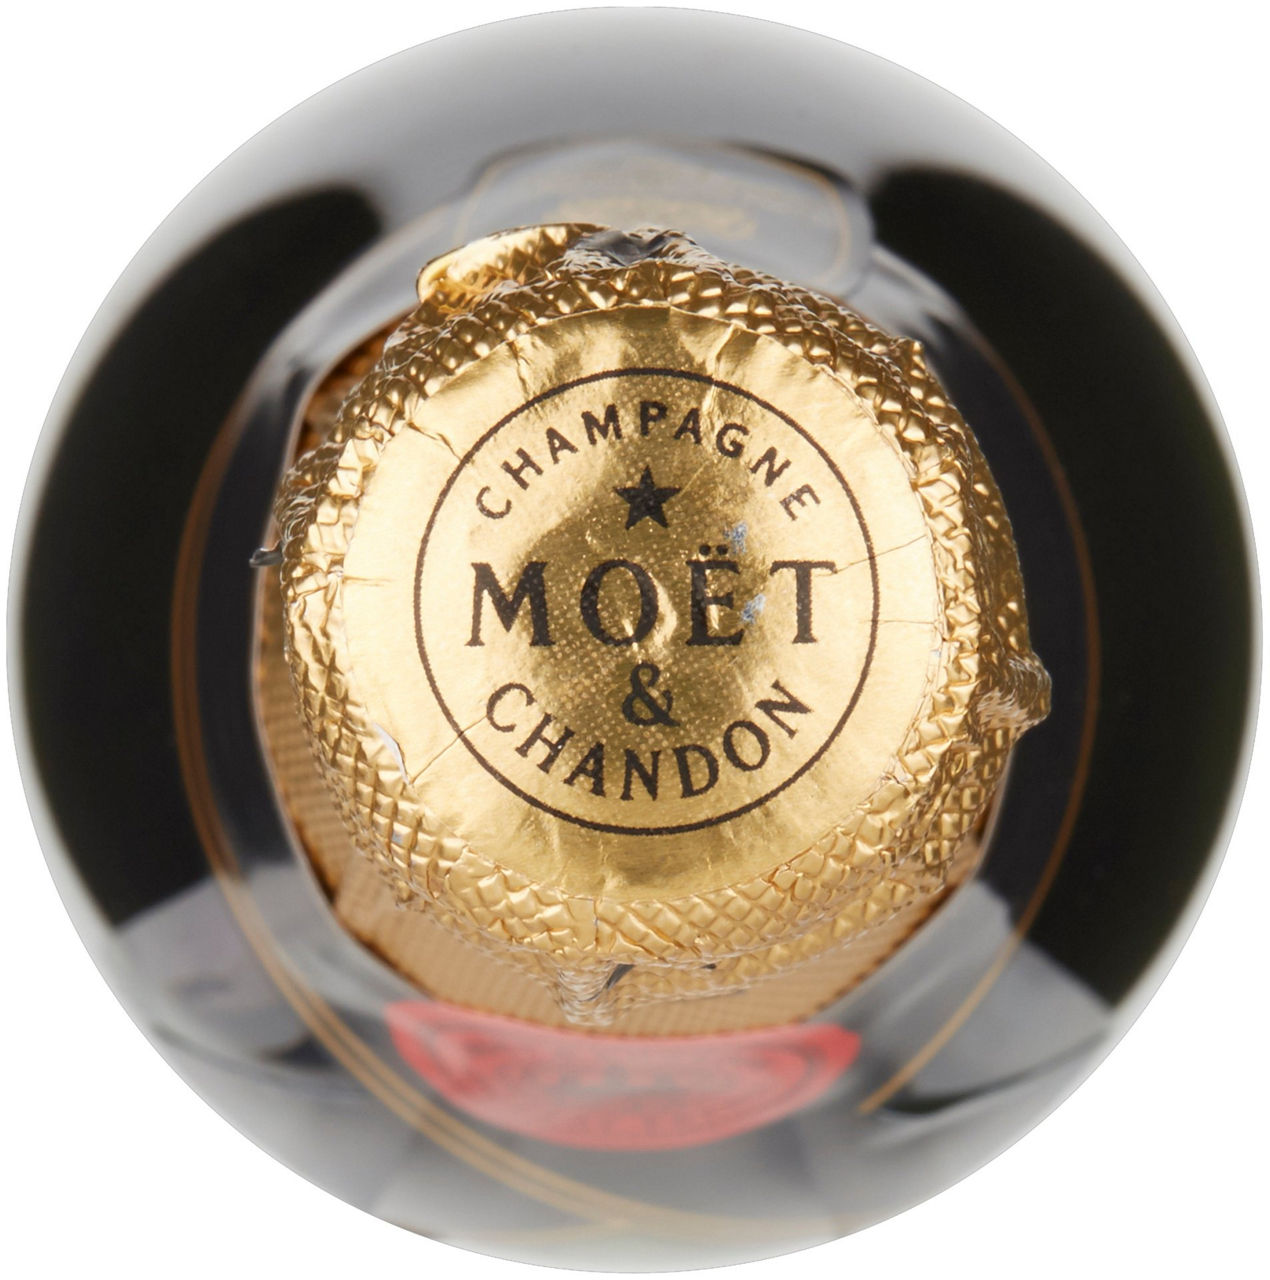 CHAMPAGNE MOET & CHANDON IMPERIAL ML 375 - 4